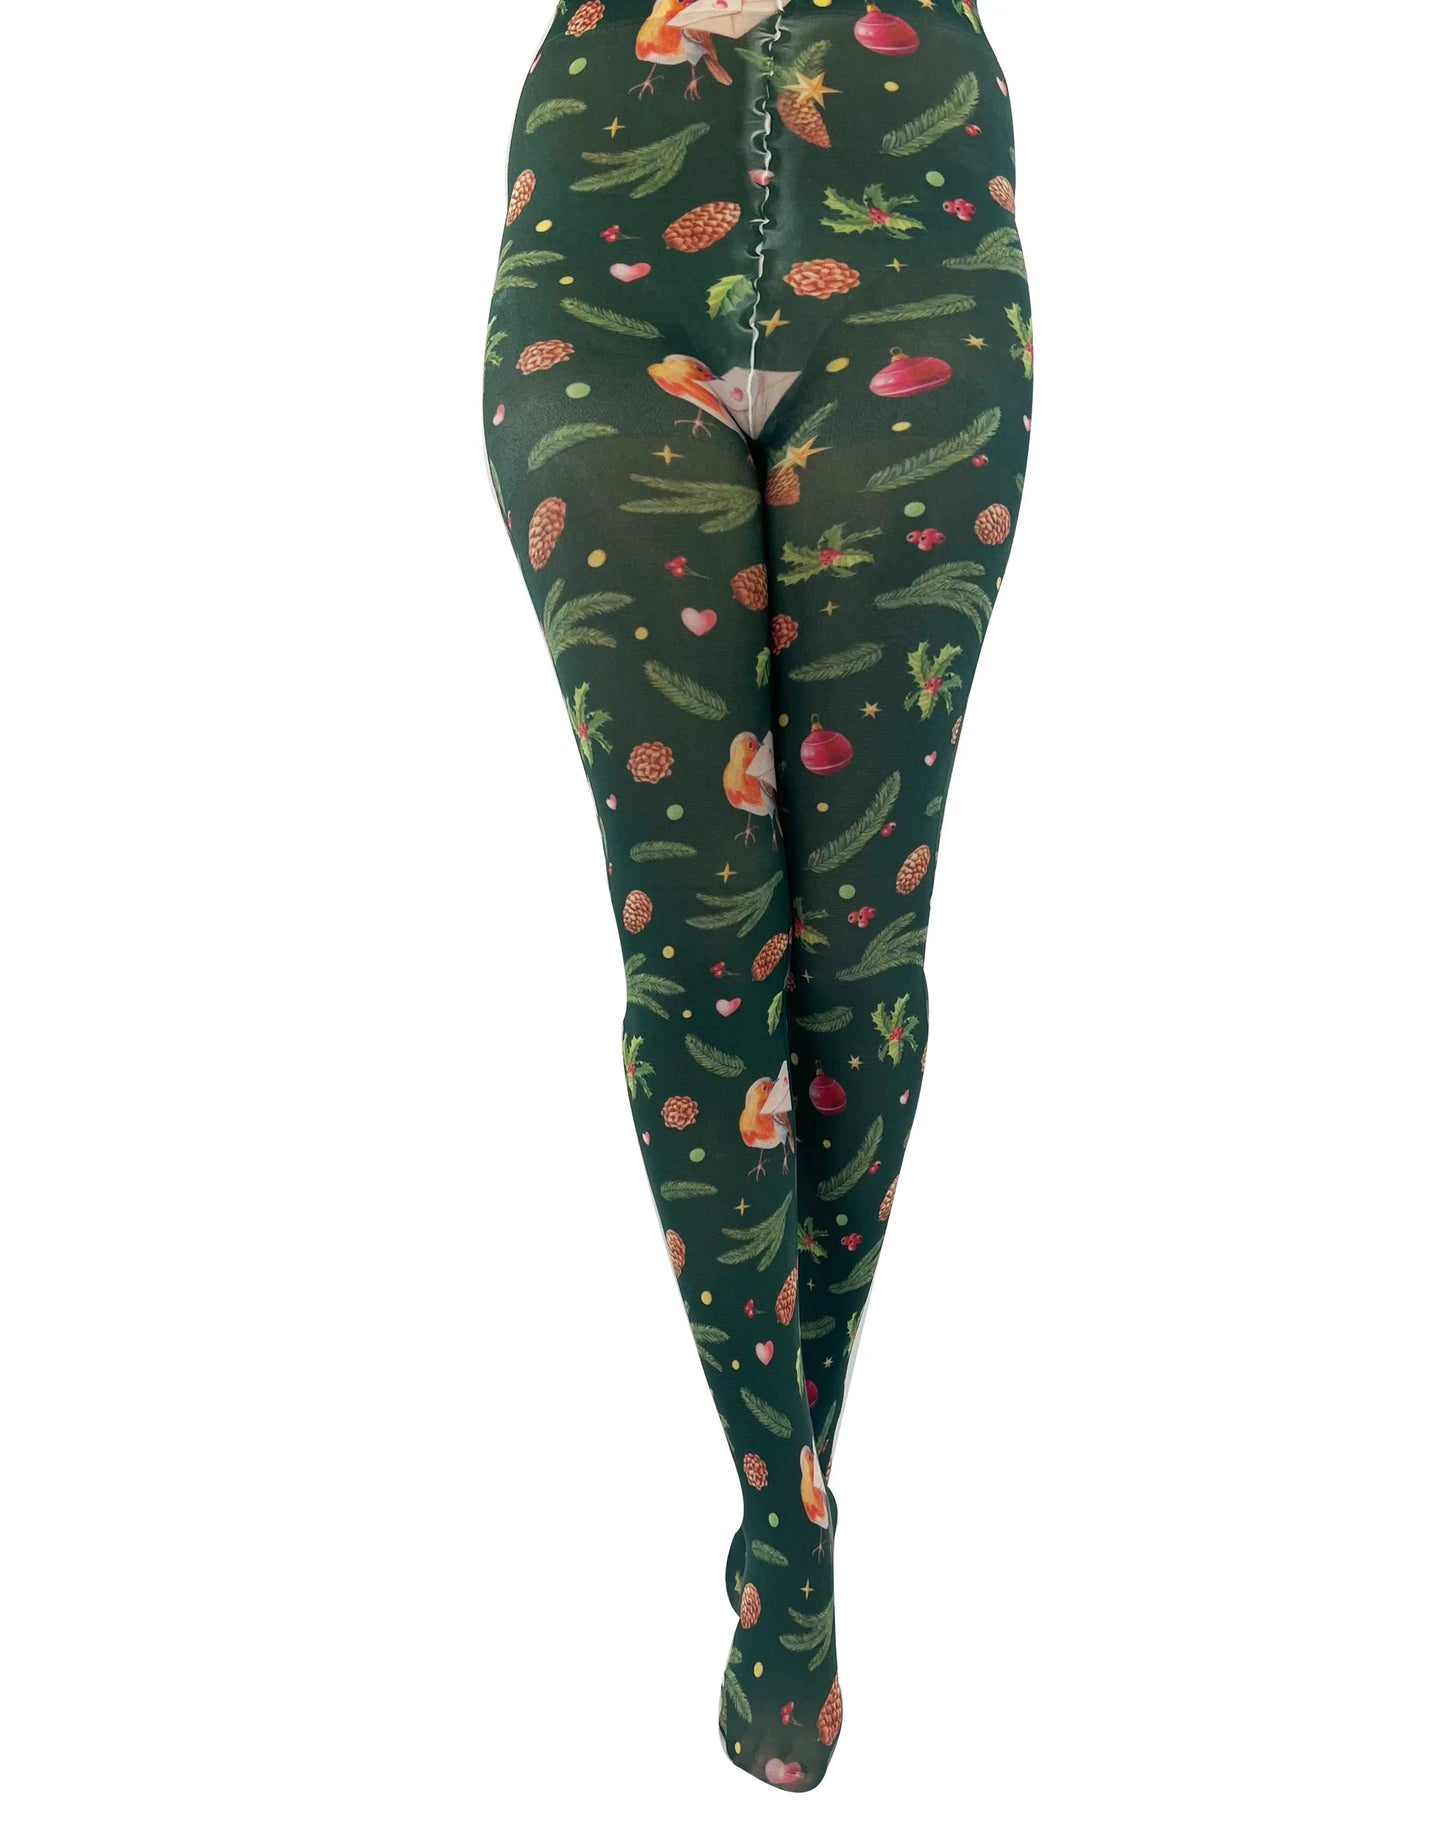 Pamela Mann Robin Printed Tights - White opaque tights with an all over Christmas themed print of Robins delivering letters, holly, pine cones, baubles, stars and hearts on a dark bottle green background.